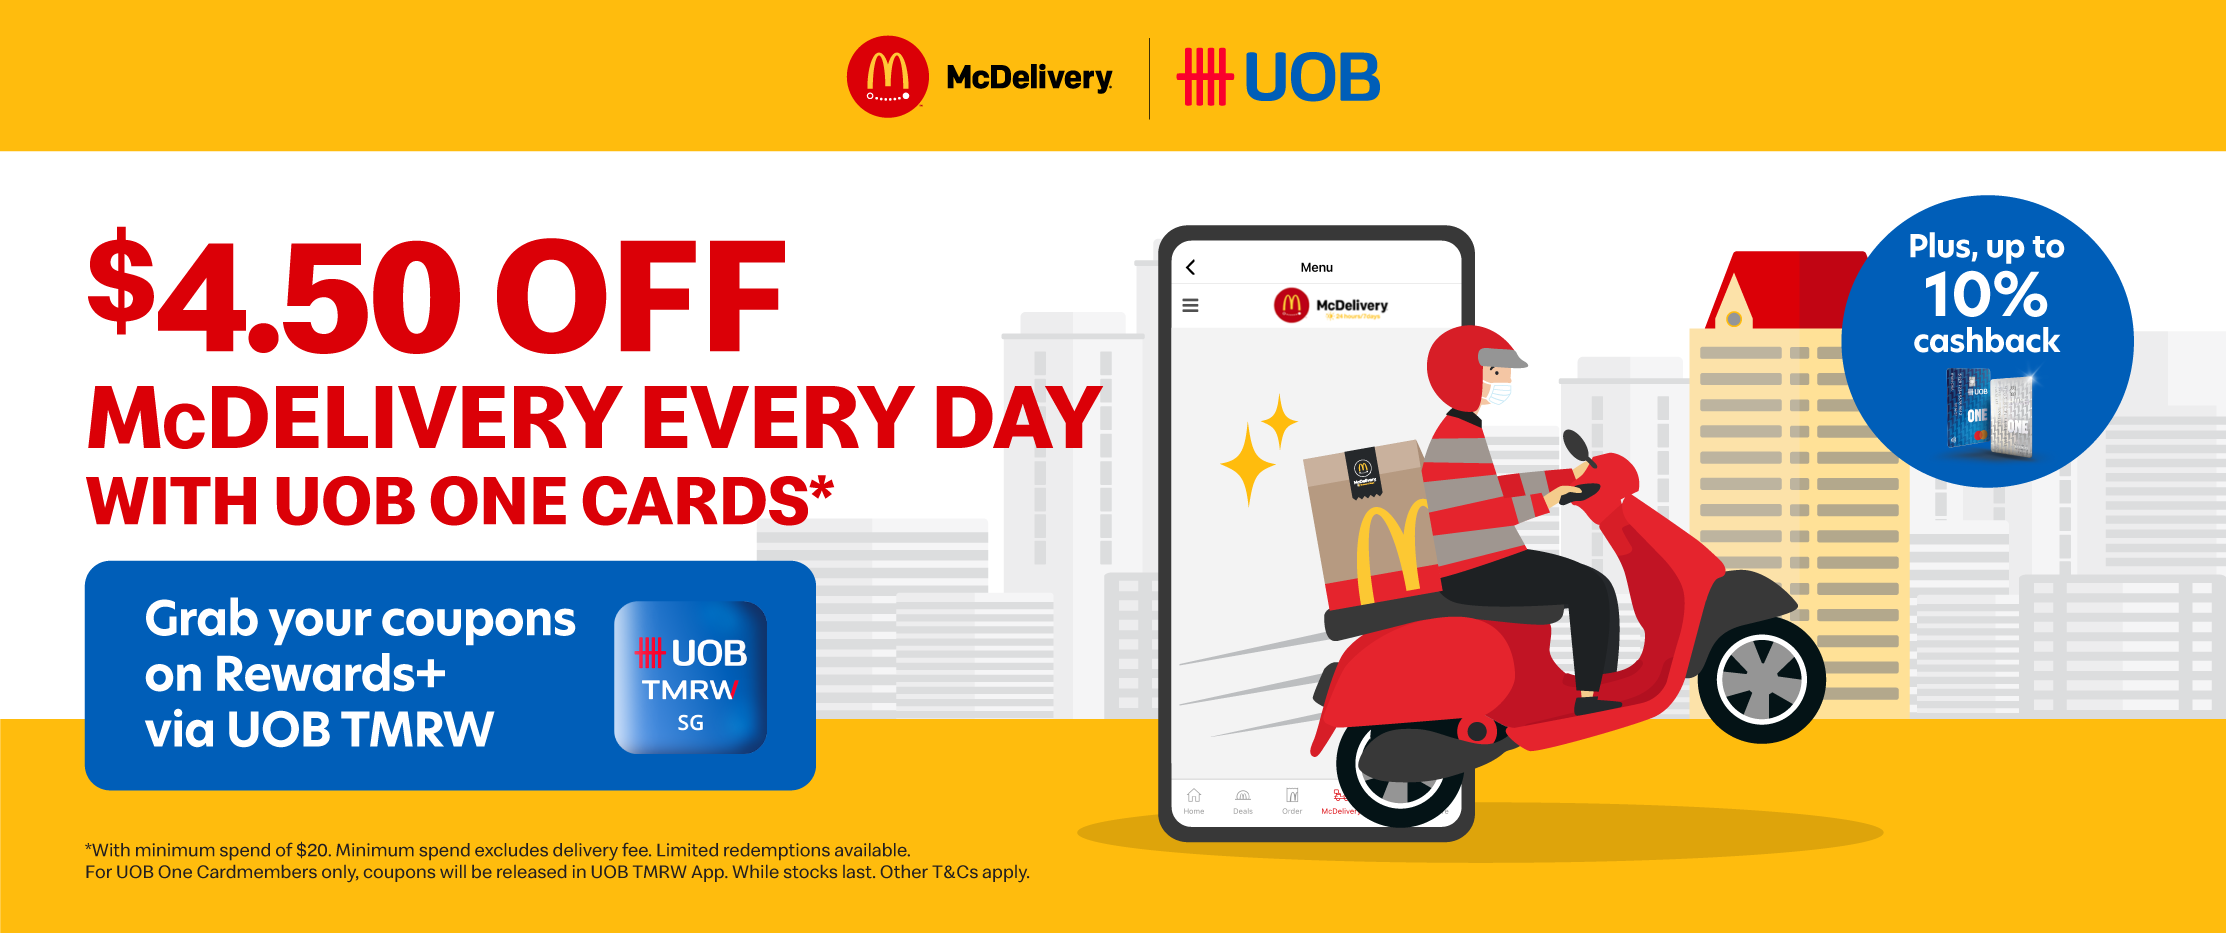 Save more with UOB One Cards